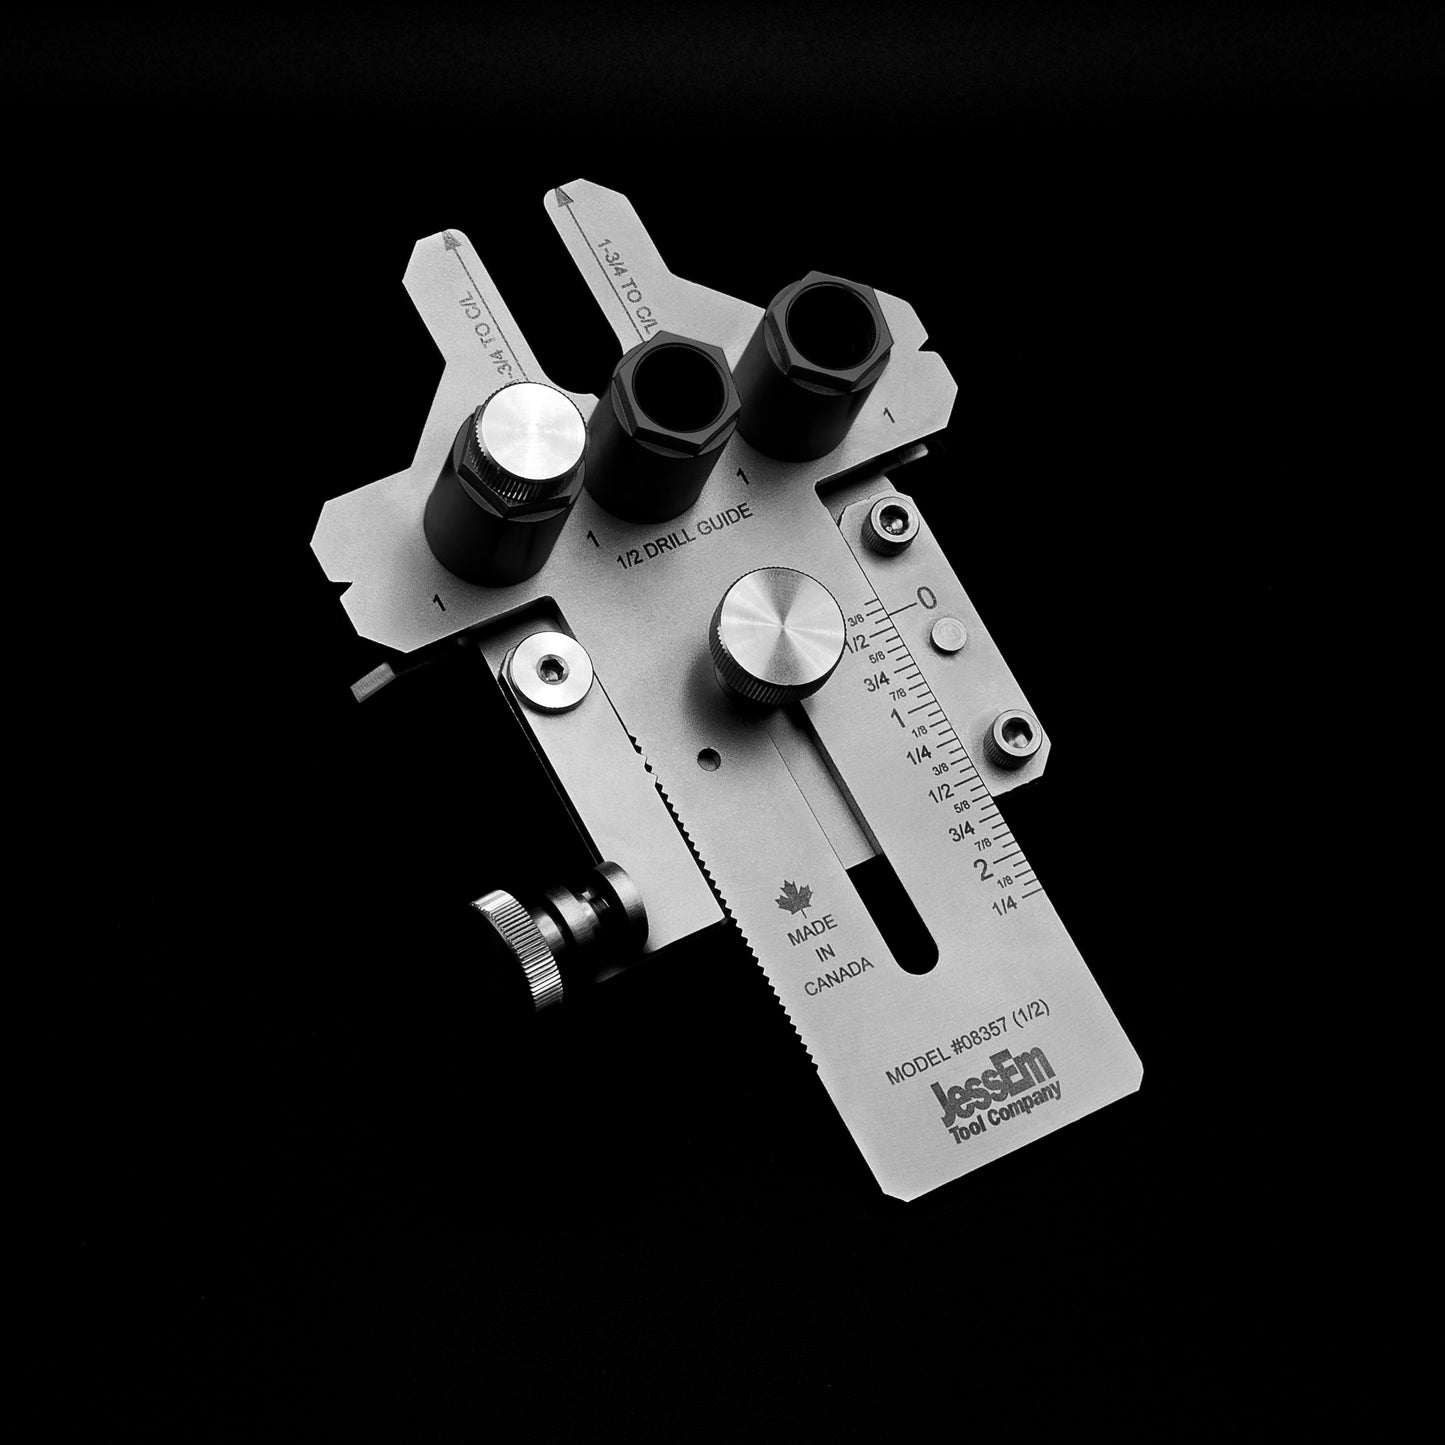 New Stainless Steel Dowelling Jig - THESE ITEMS ARE ESTIMATED TO SHIP WITHIN 4 - 6 WEEKS